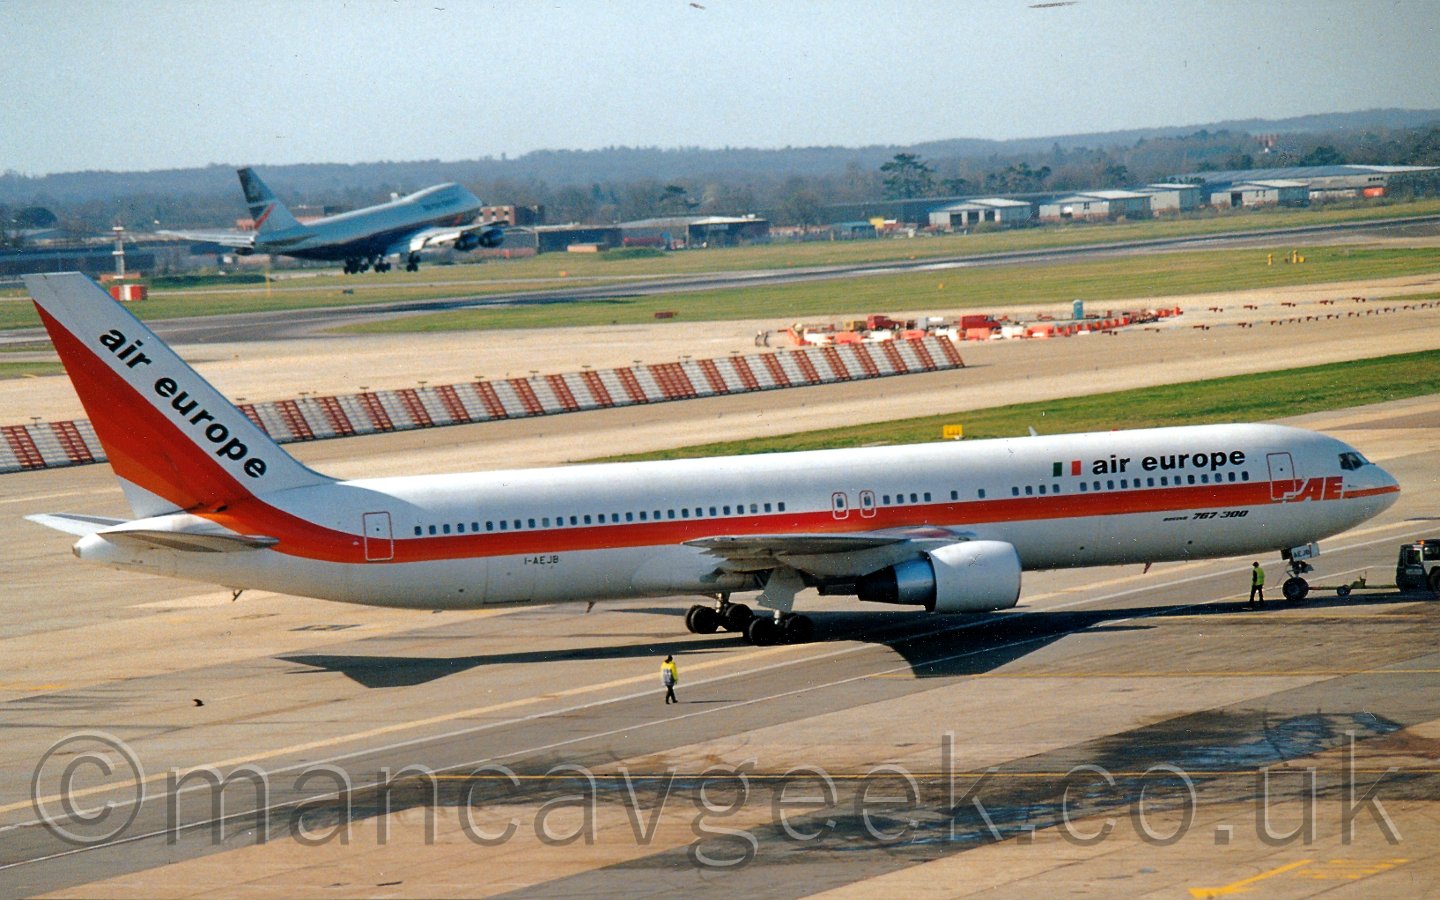 Side view of a twin engined jet airliner being pushed back from it's gate, to the left, by a grey tug attached to the nosewheel, with someone in a hi-viz vest walking alongside the nosewheel, and another person in a hi-viz jacket walking by the wingtip. The plane is mostly white, with a red and orange stripe running along the body and sweeping up in to the tail. There are black "air europe" titles on the upper forward fuselage, next to an Italian flag (vertical green, white, and orange bars), and diagonally on the tail. In the background, a white and red striped metal barrier runs most of the way across the frame from the left, seperating 2 sections of taxiway, with a small construction site at the end. In the background, a runway runs from one side of the frame to the other, lined with buildings on the far side, and with a very large dark blue and grey plane coming in to land, flying just feet above it. Trees lead off in to the distance, meeting a bright but hazy sky.